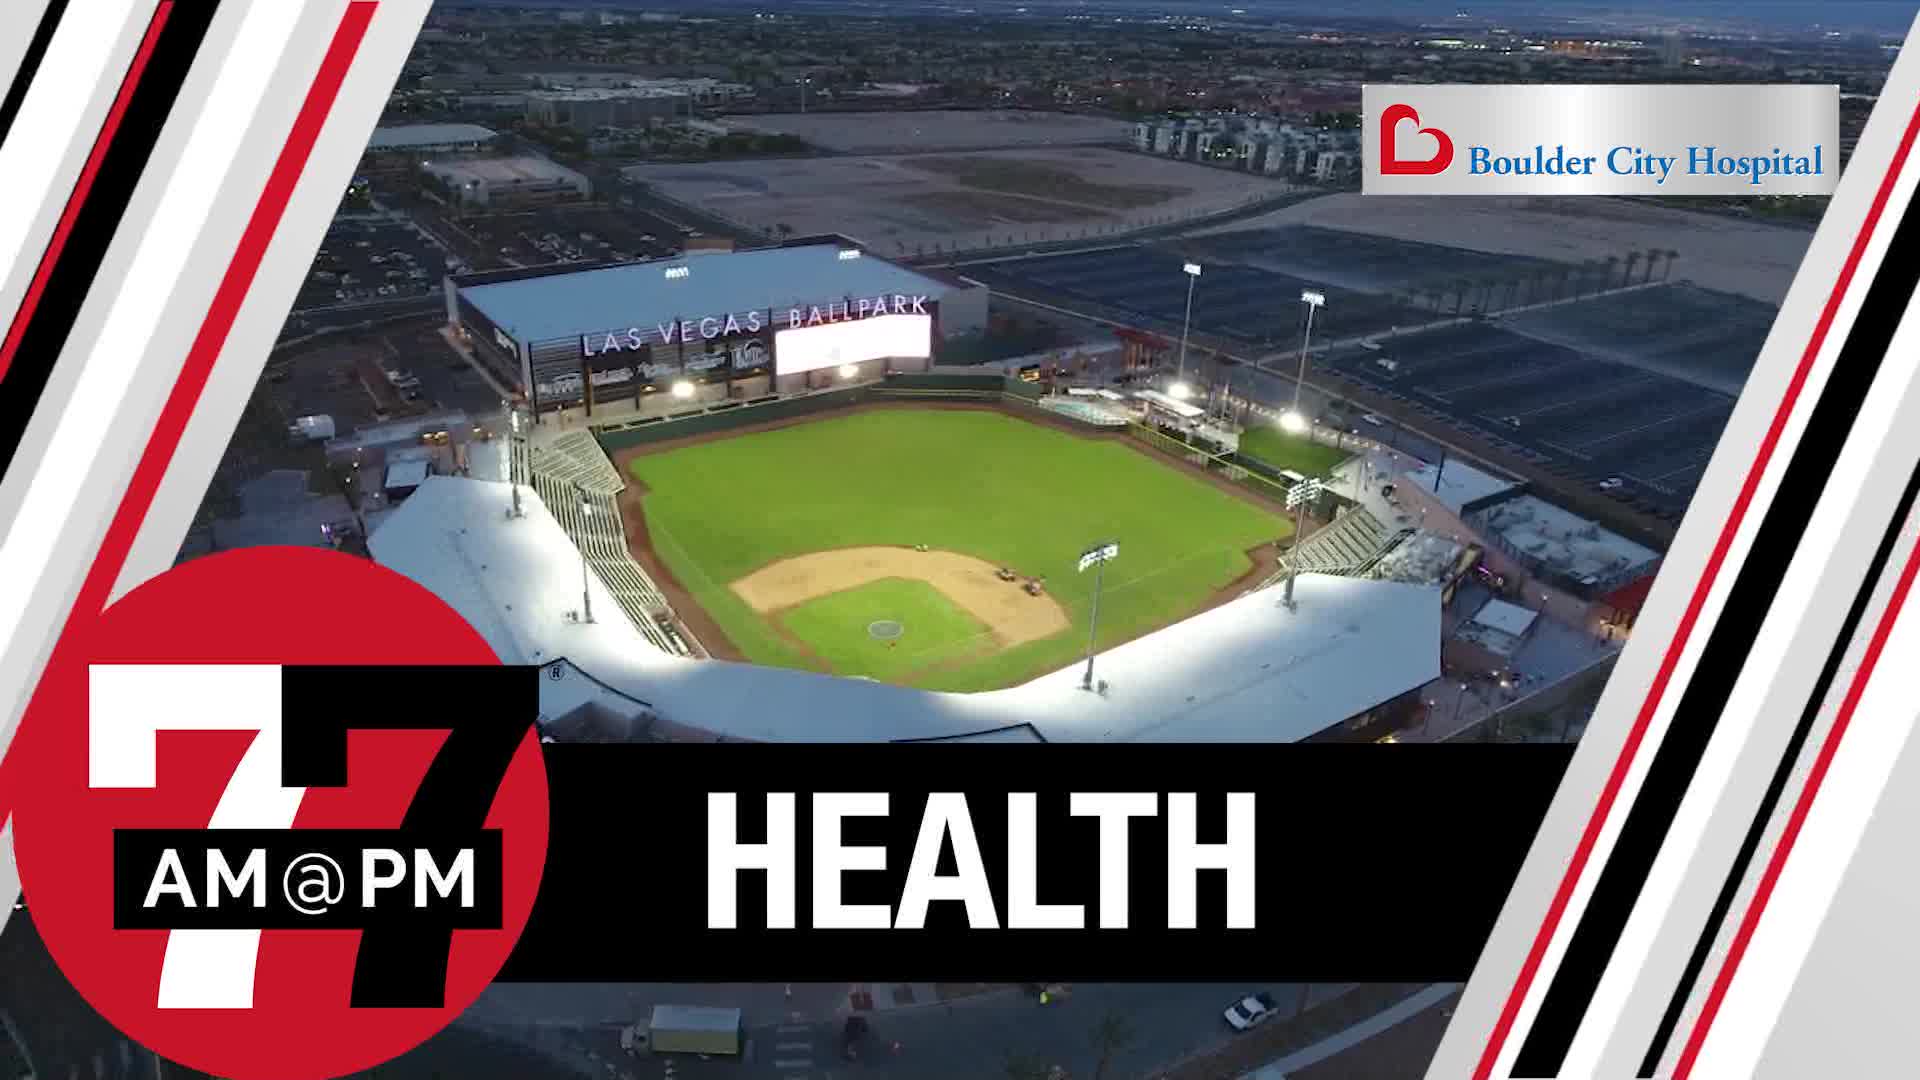 Blood Drive hosted by Las Vegas Ballpark